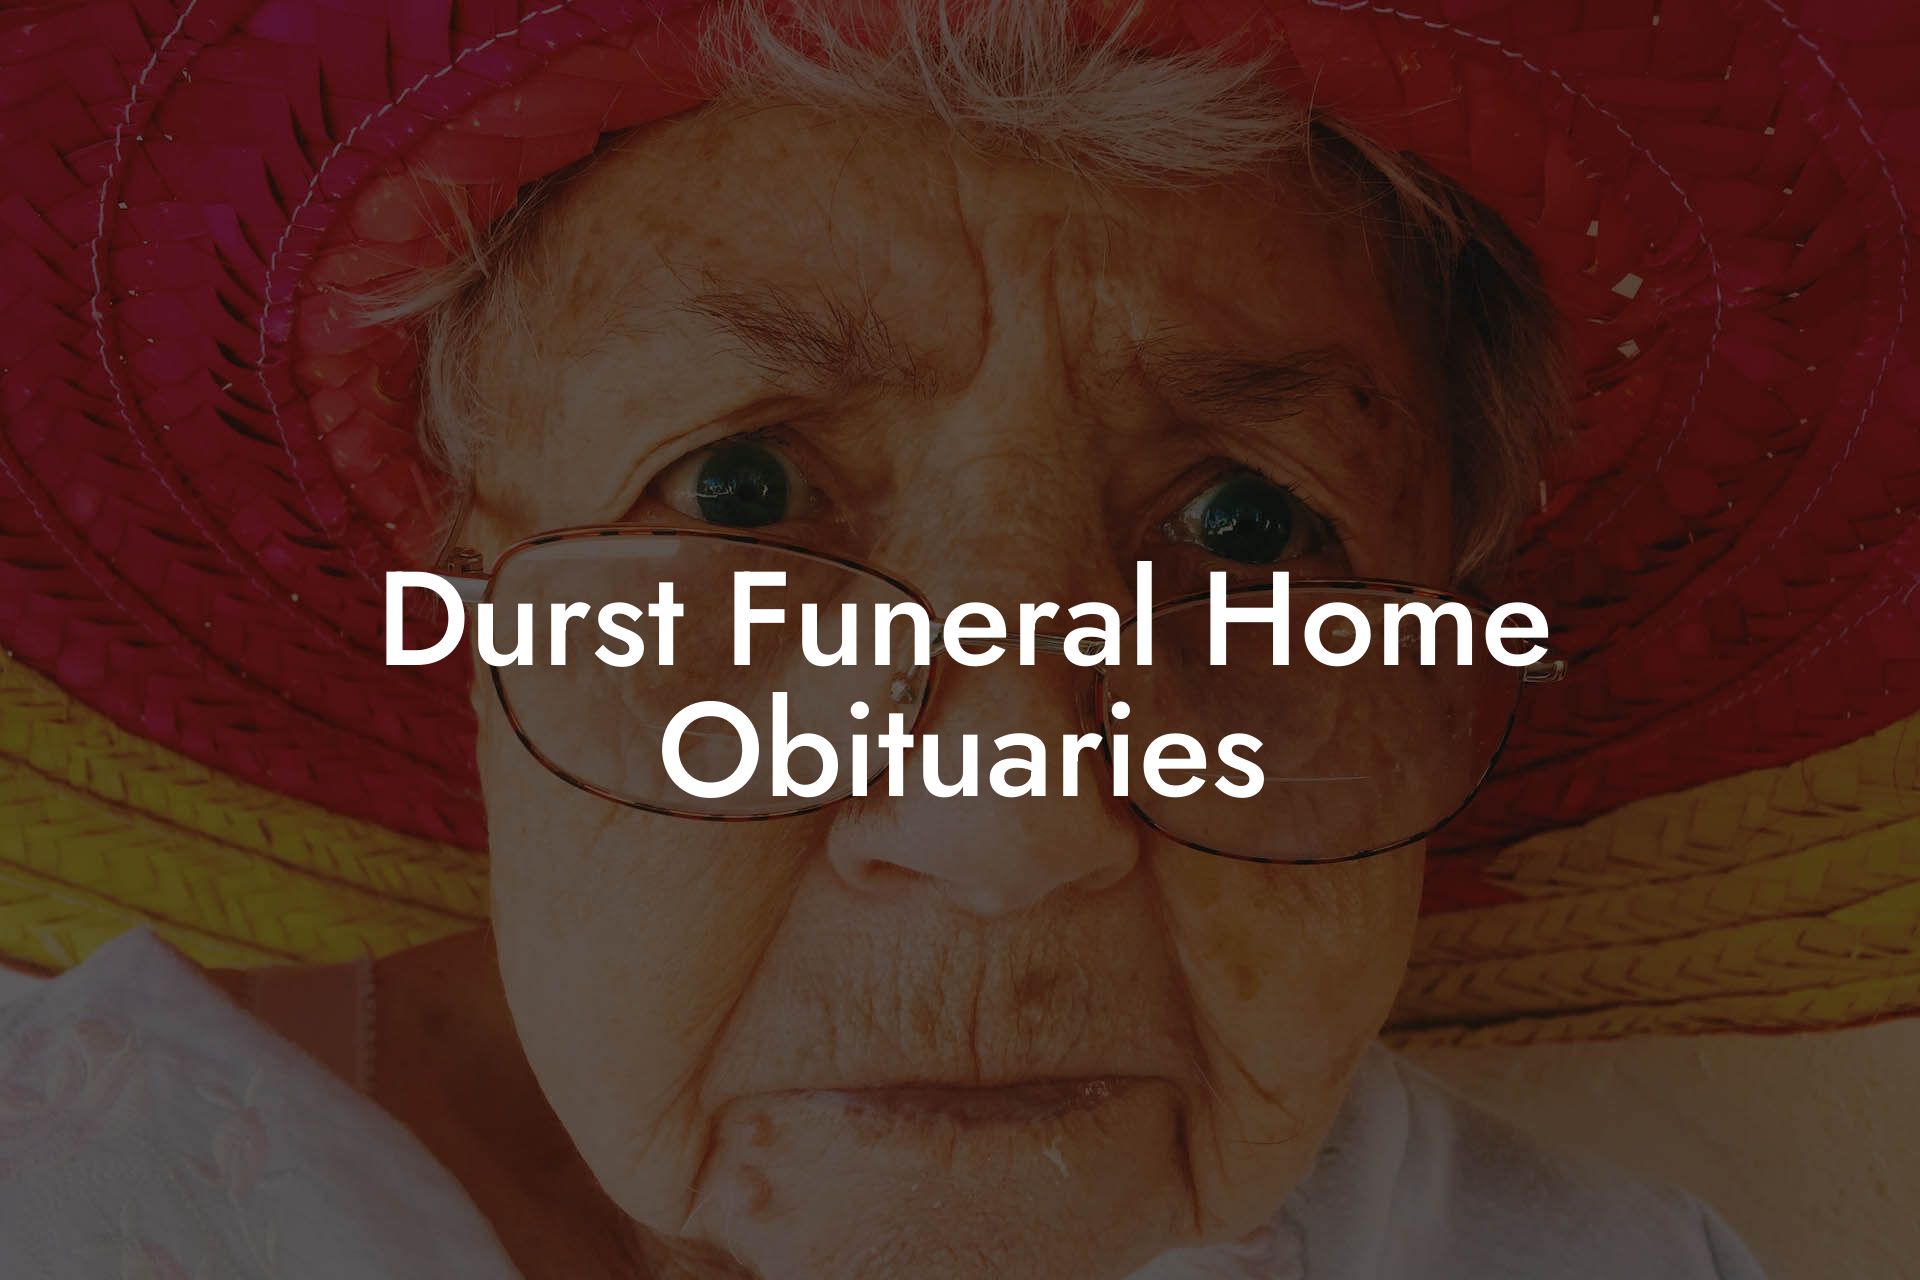 Durst Funeral Home Obituaries